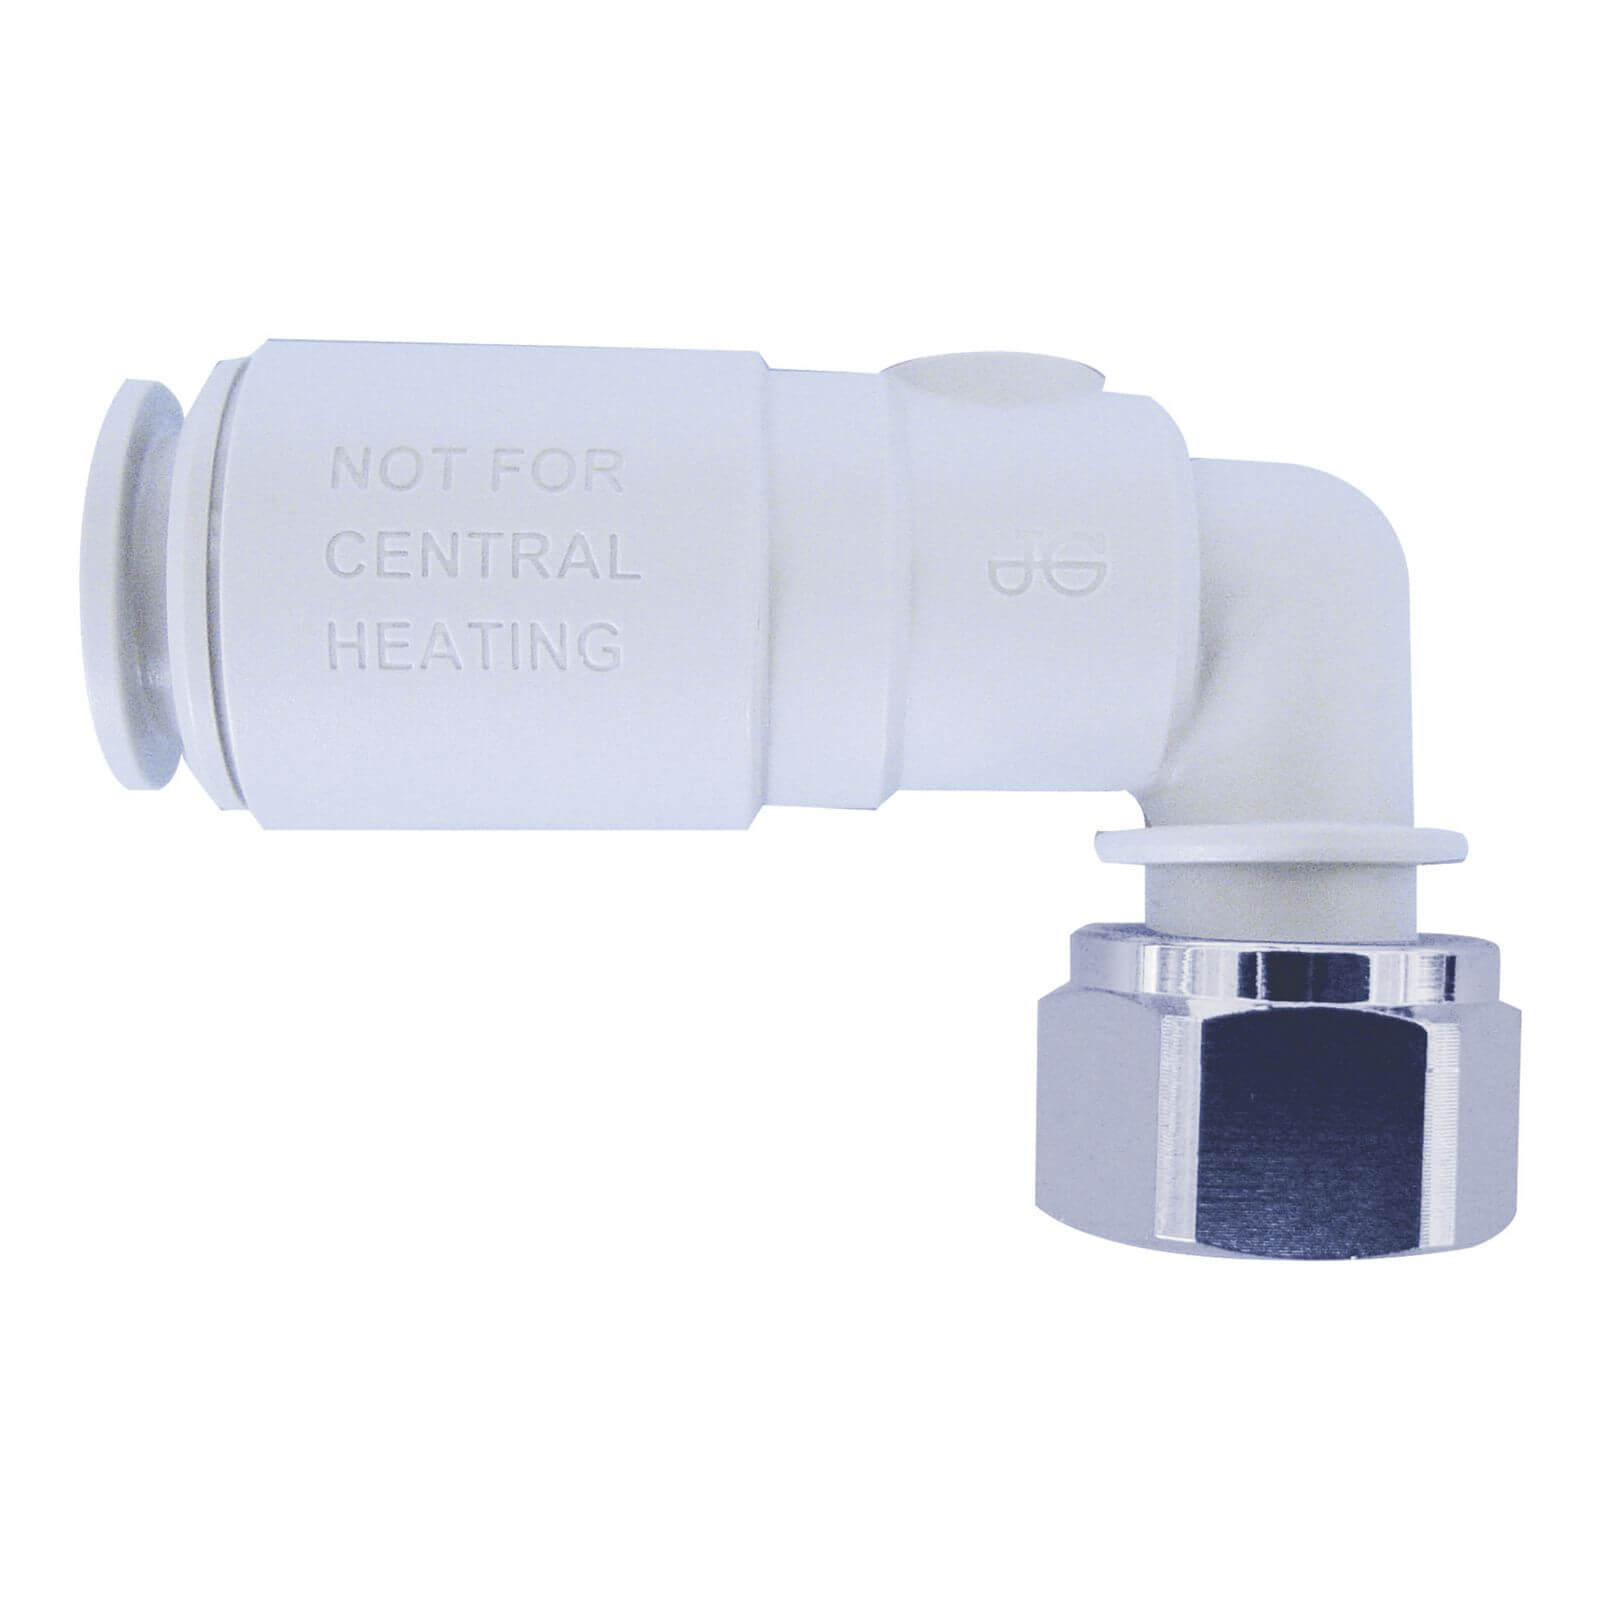 Photo of Jg Speedfit Angle Tap Service Valve - 15mm X 1/2in